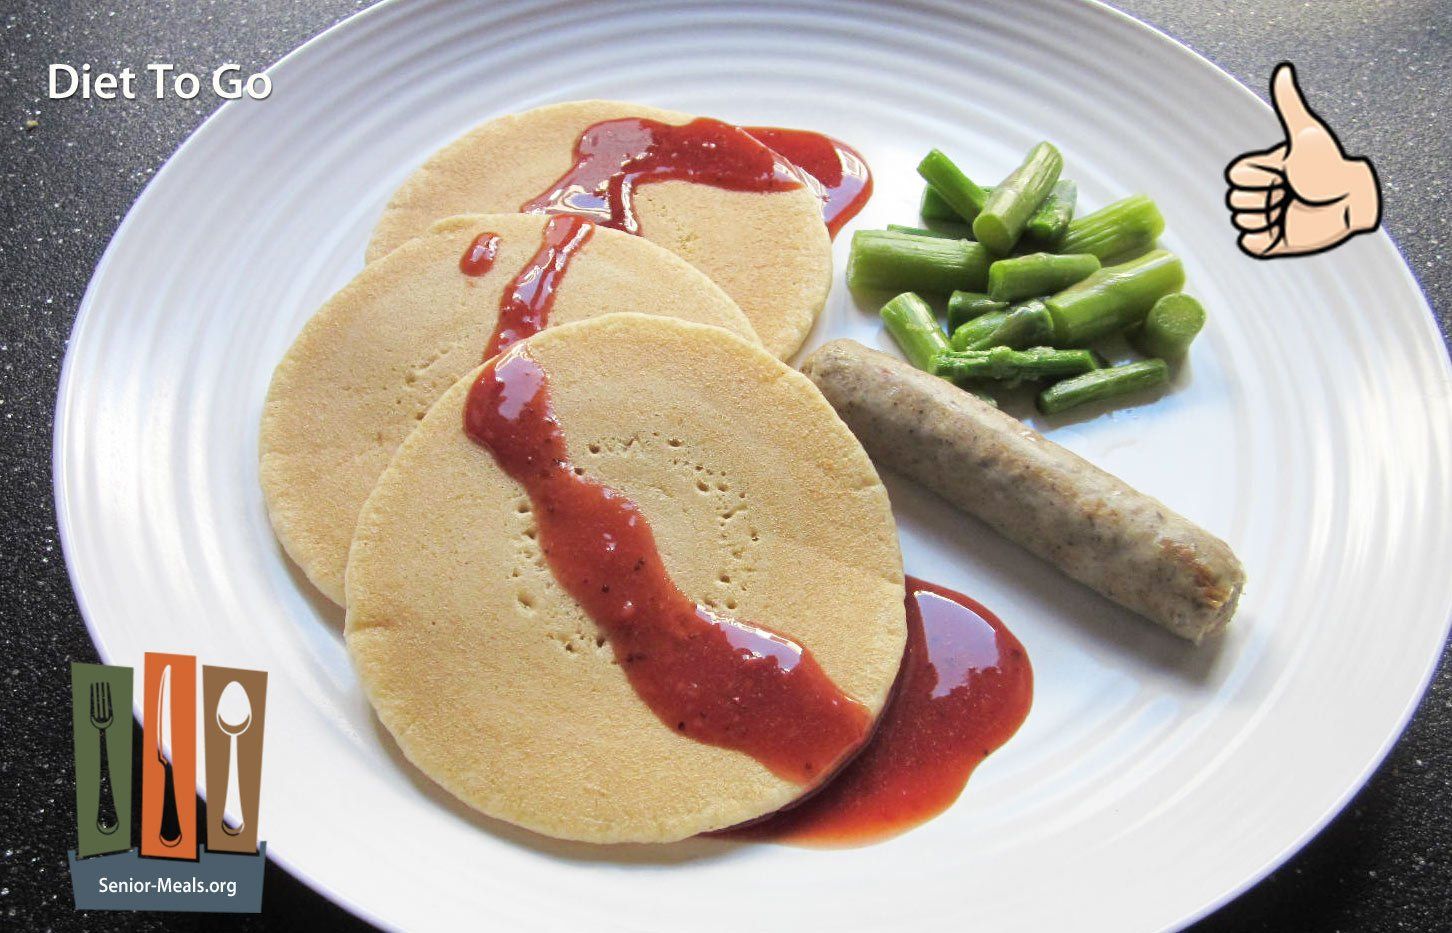 Whole Grain Pancakes with Strawberry Maple Syrup, Turkey Sausage, and Asparagus